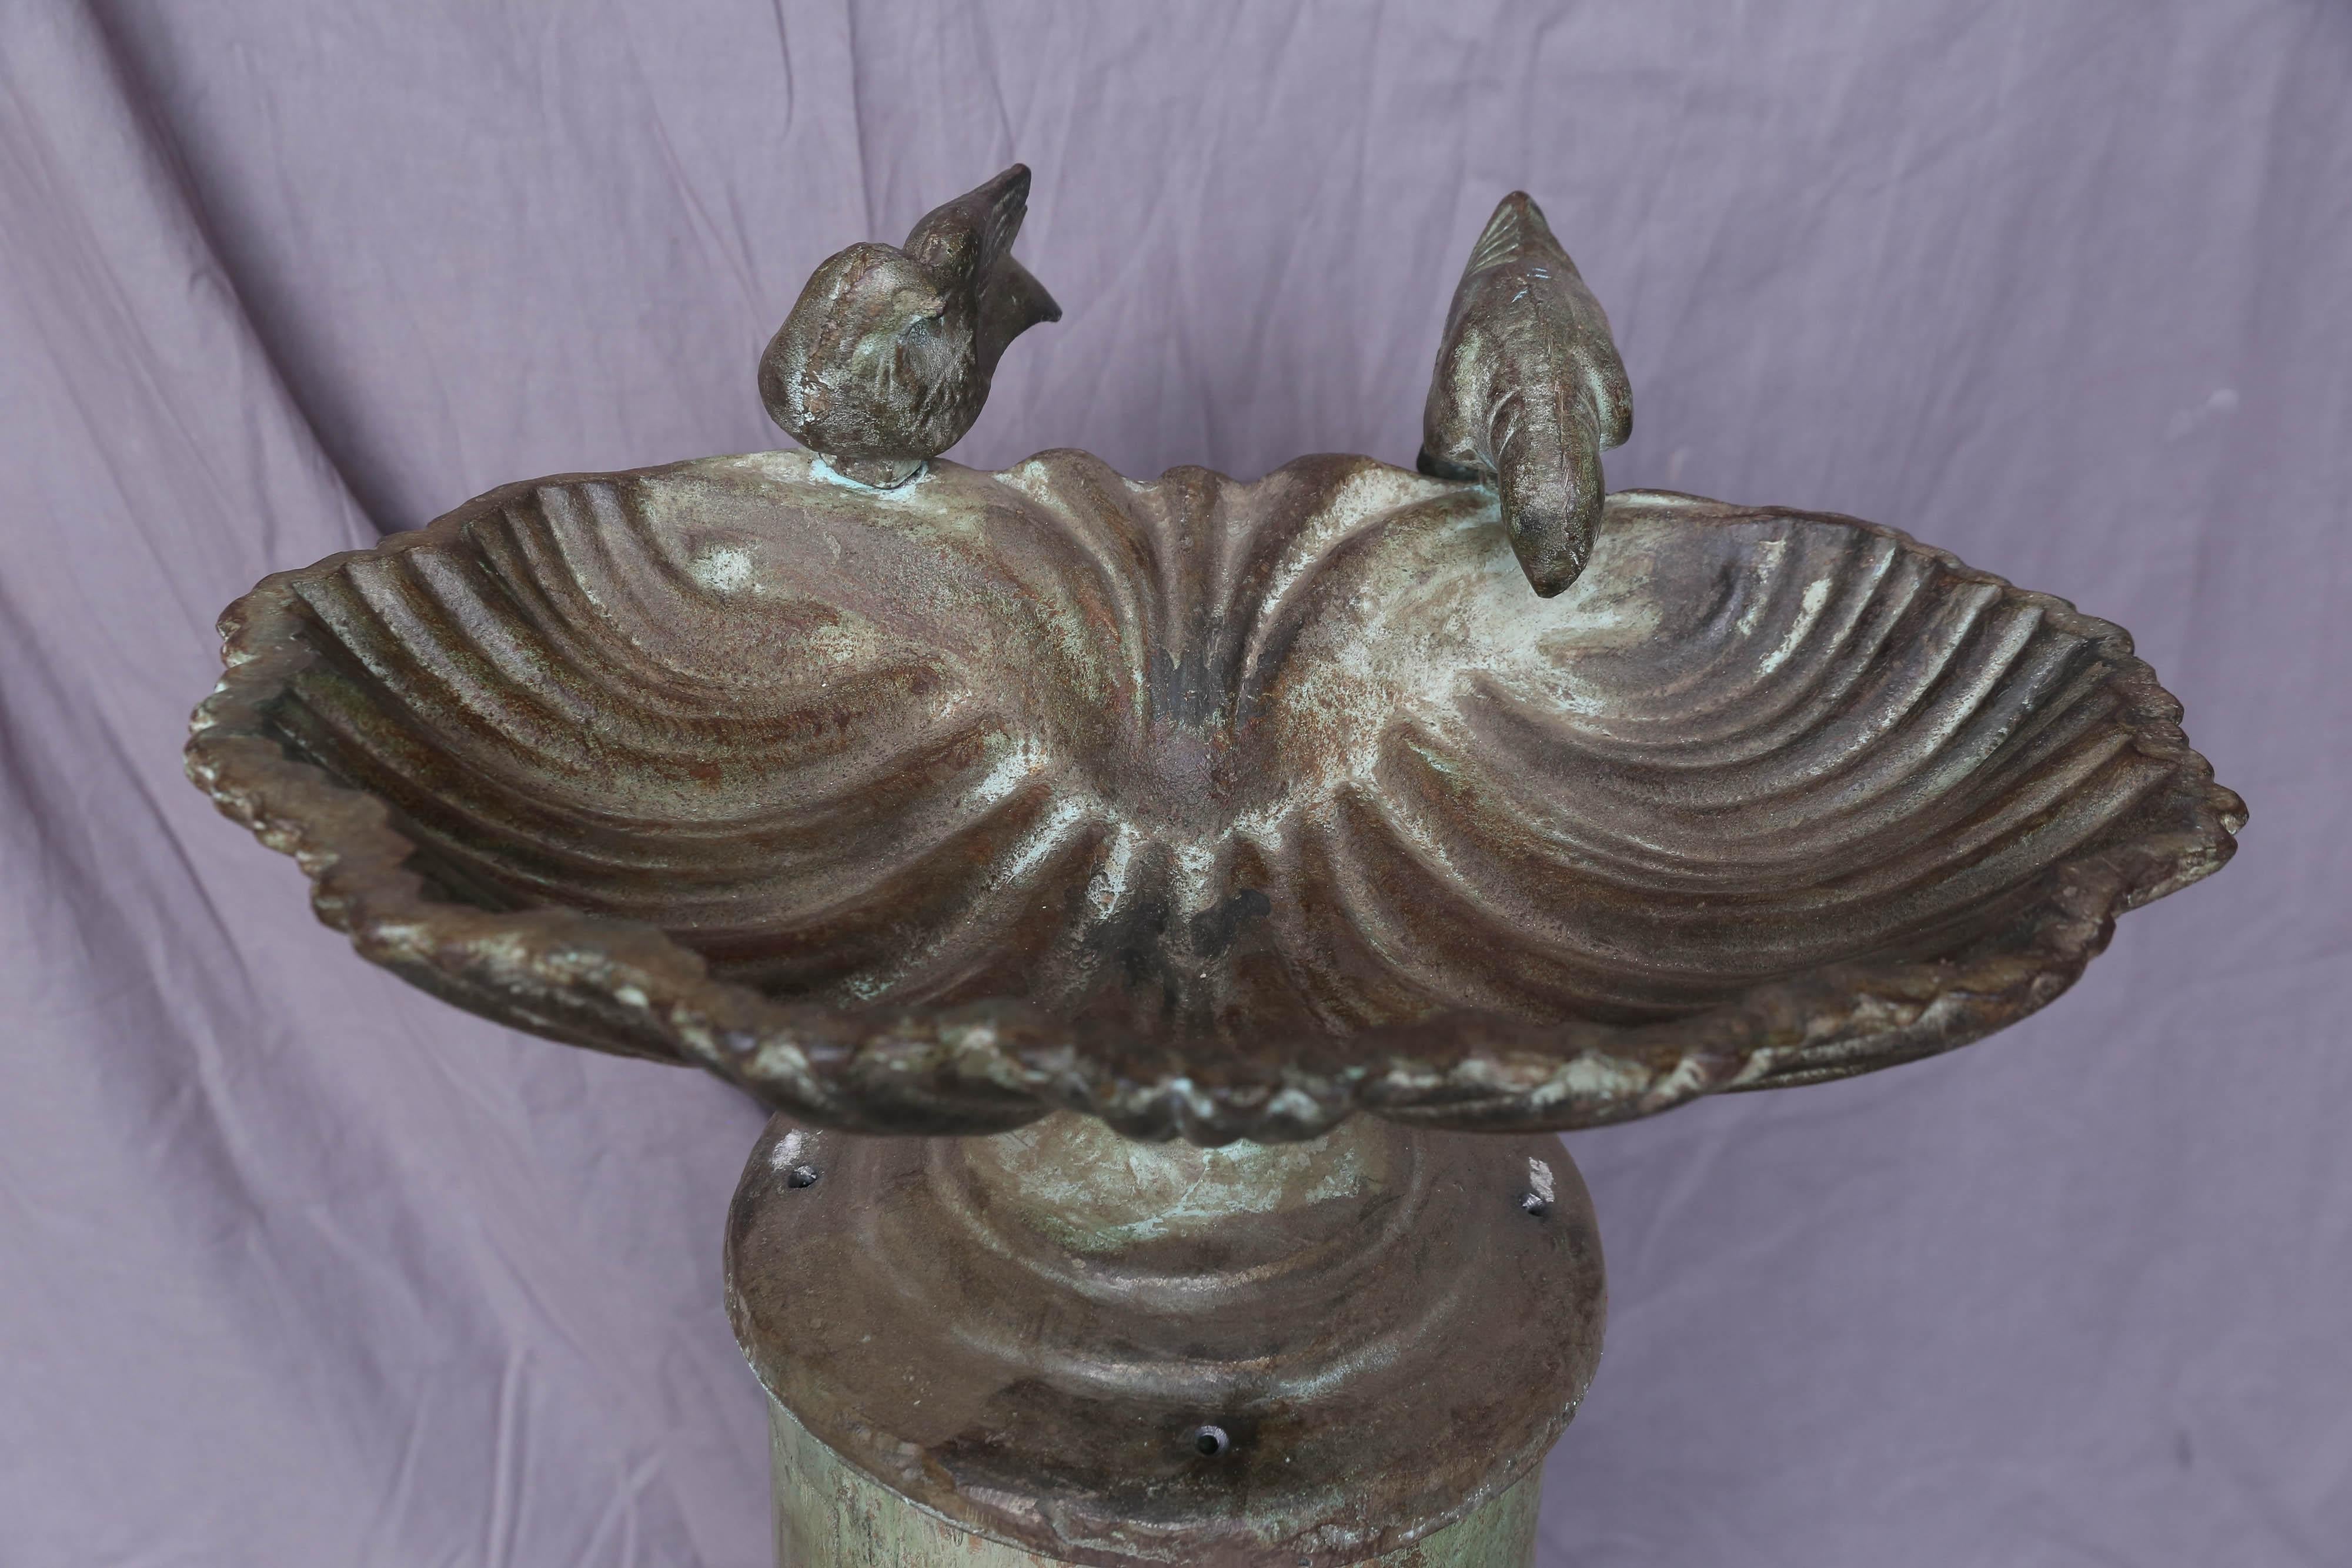 British Colonial Cute Cast Iron Bird Bath from the Back Yard Garden of a Colonial Home